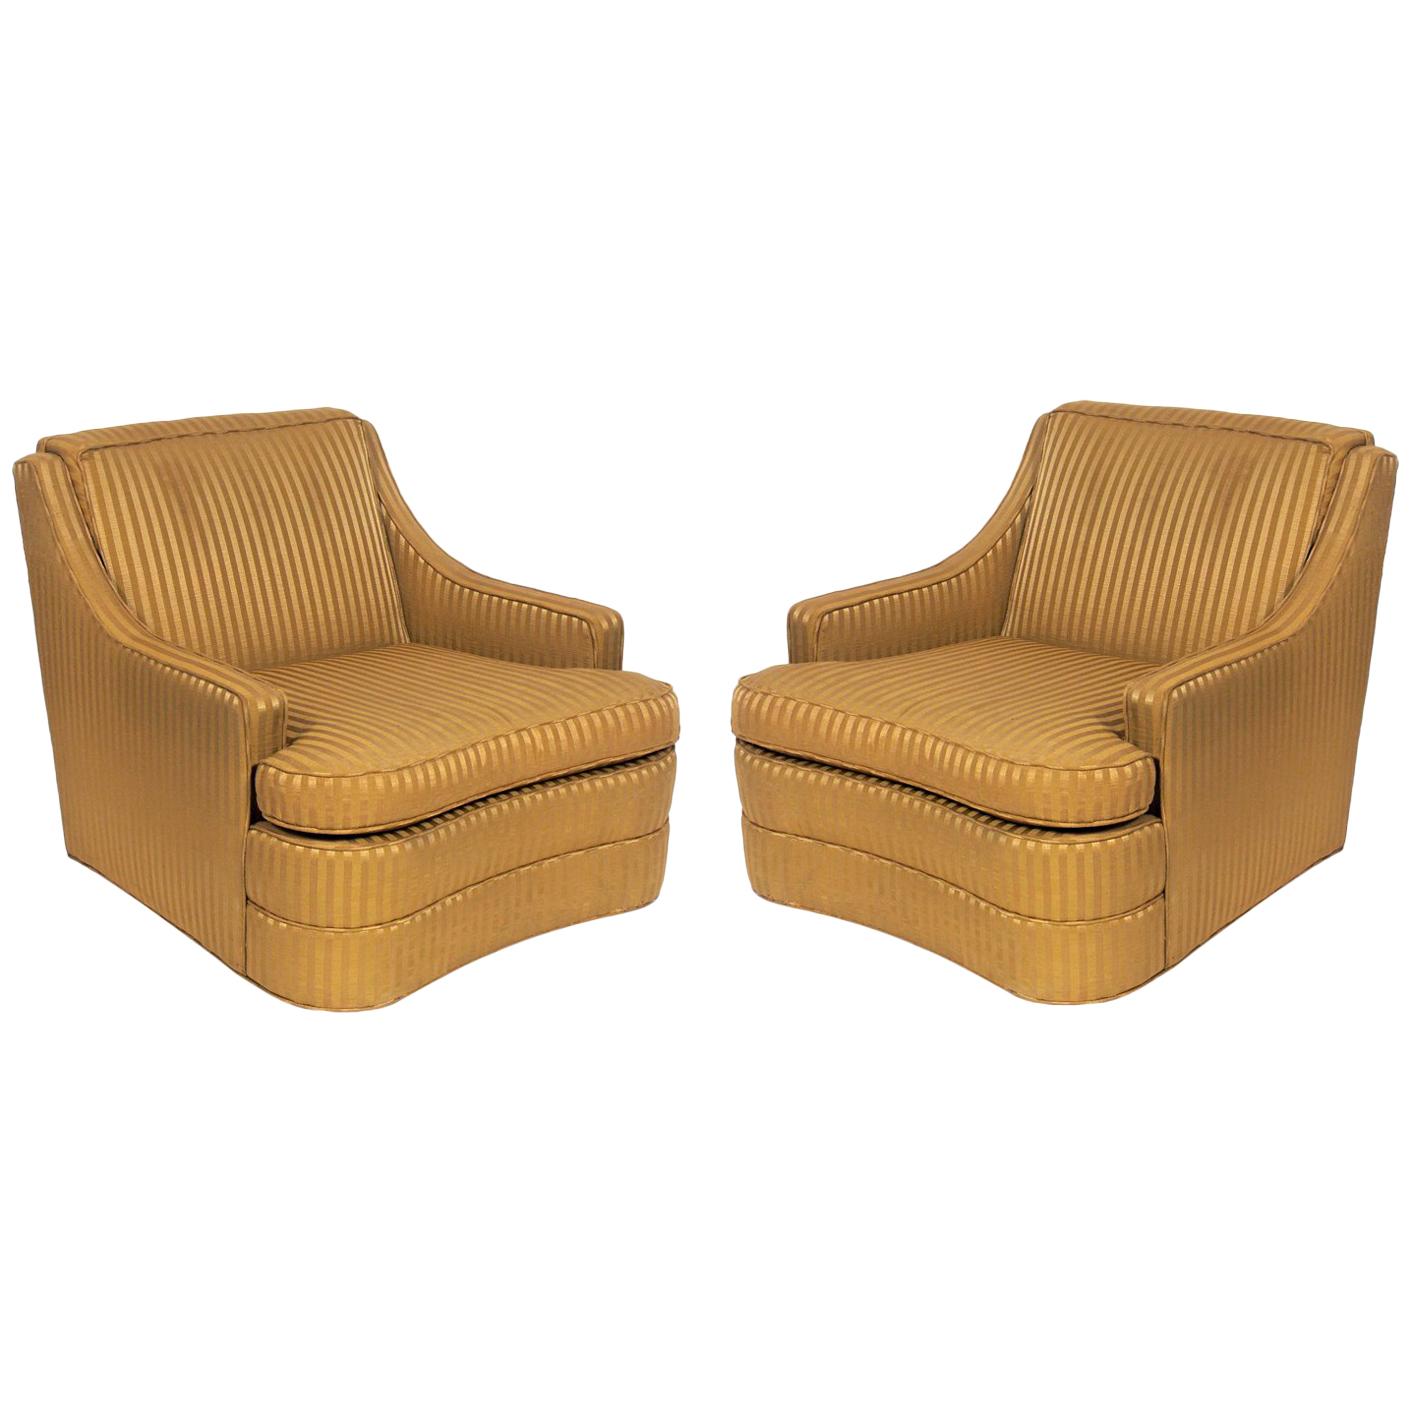 Pair of Curvaceous 1940s Lounge Chairs